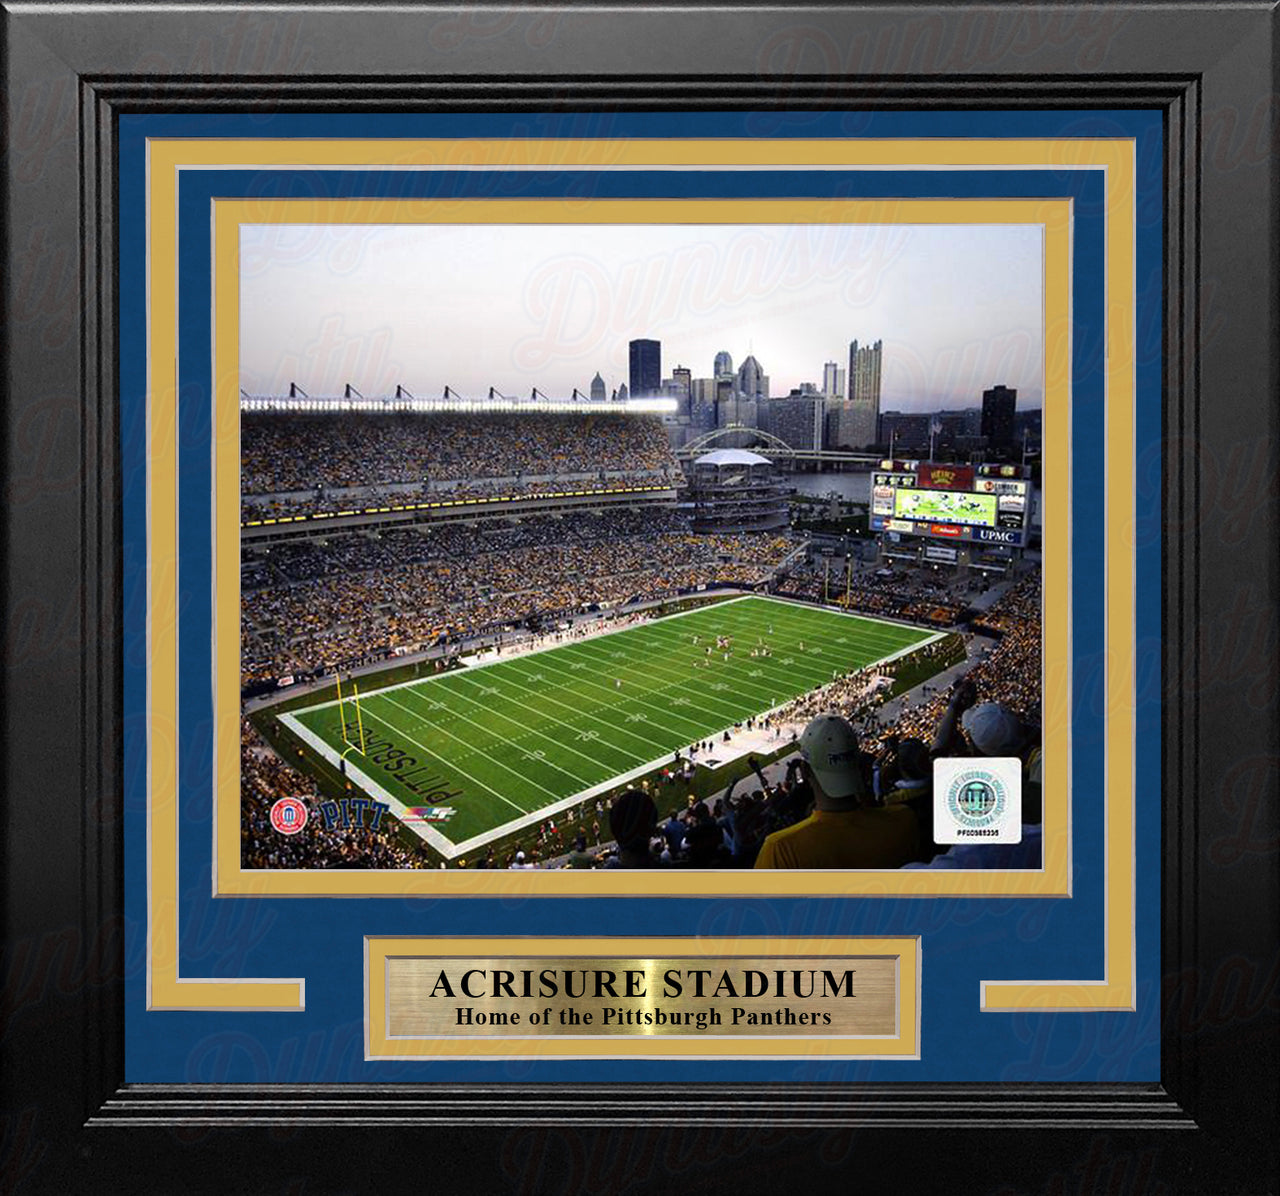 Pittsburgh Panthers Heinz Field 8" x 10" Framed College Football Stadium Photo